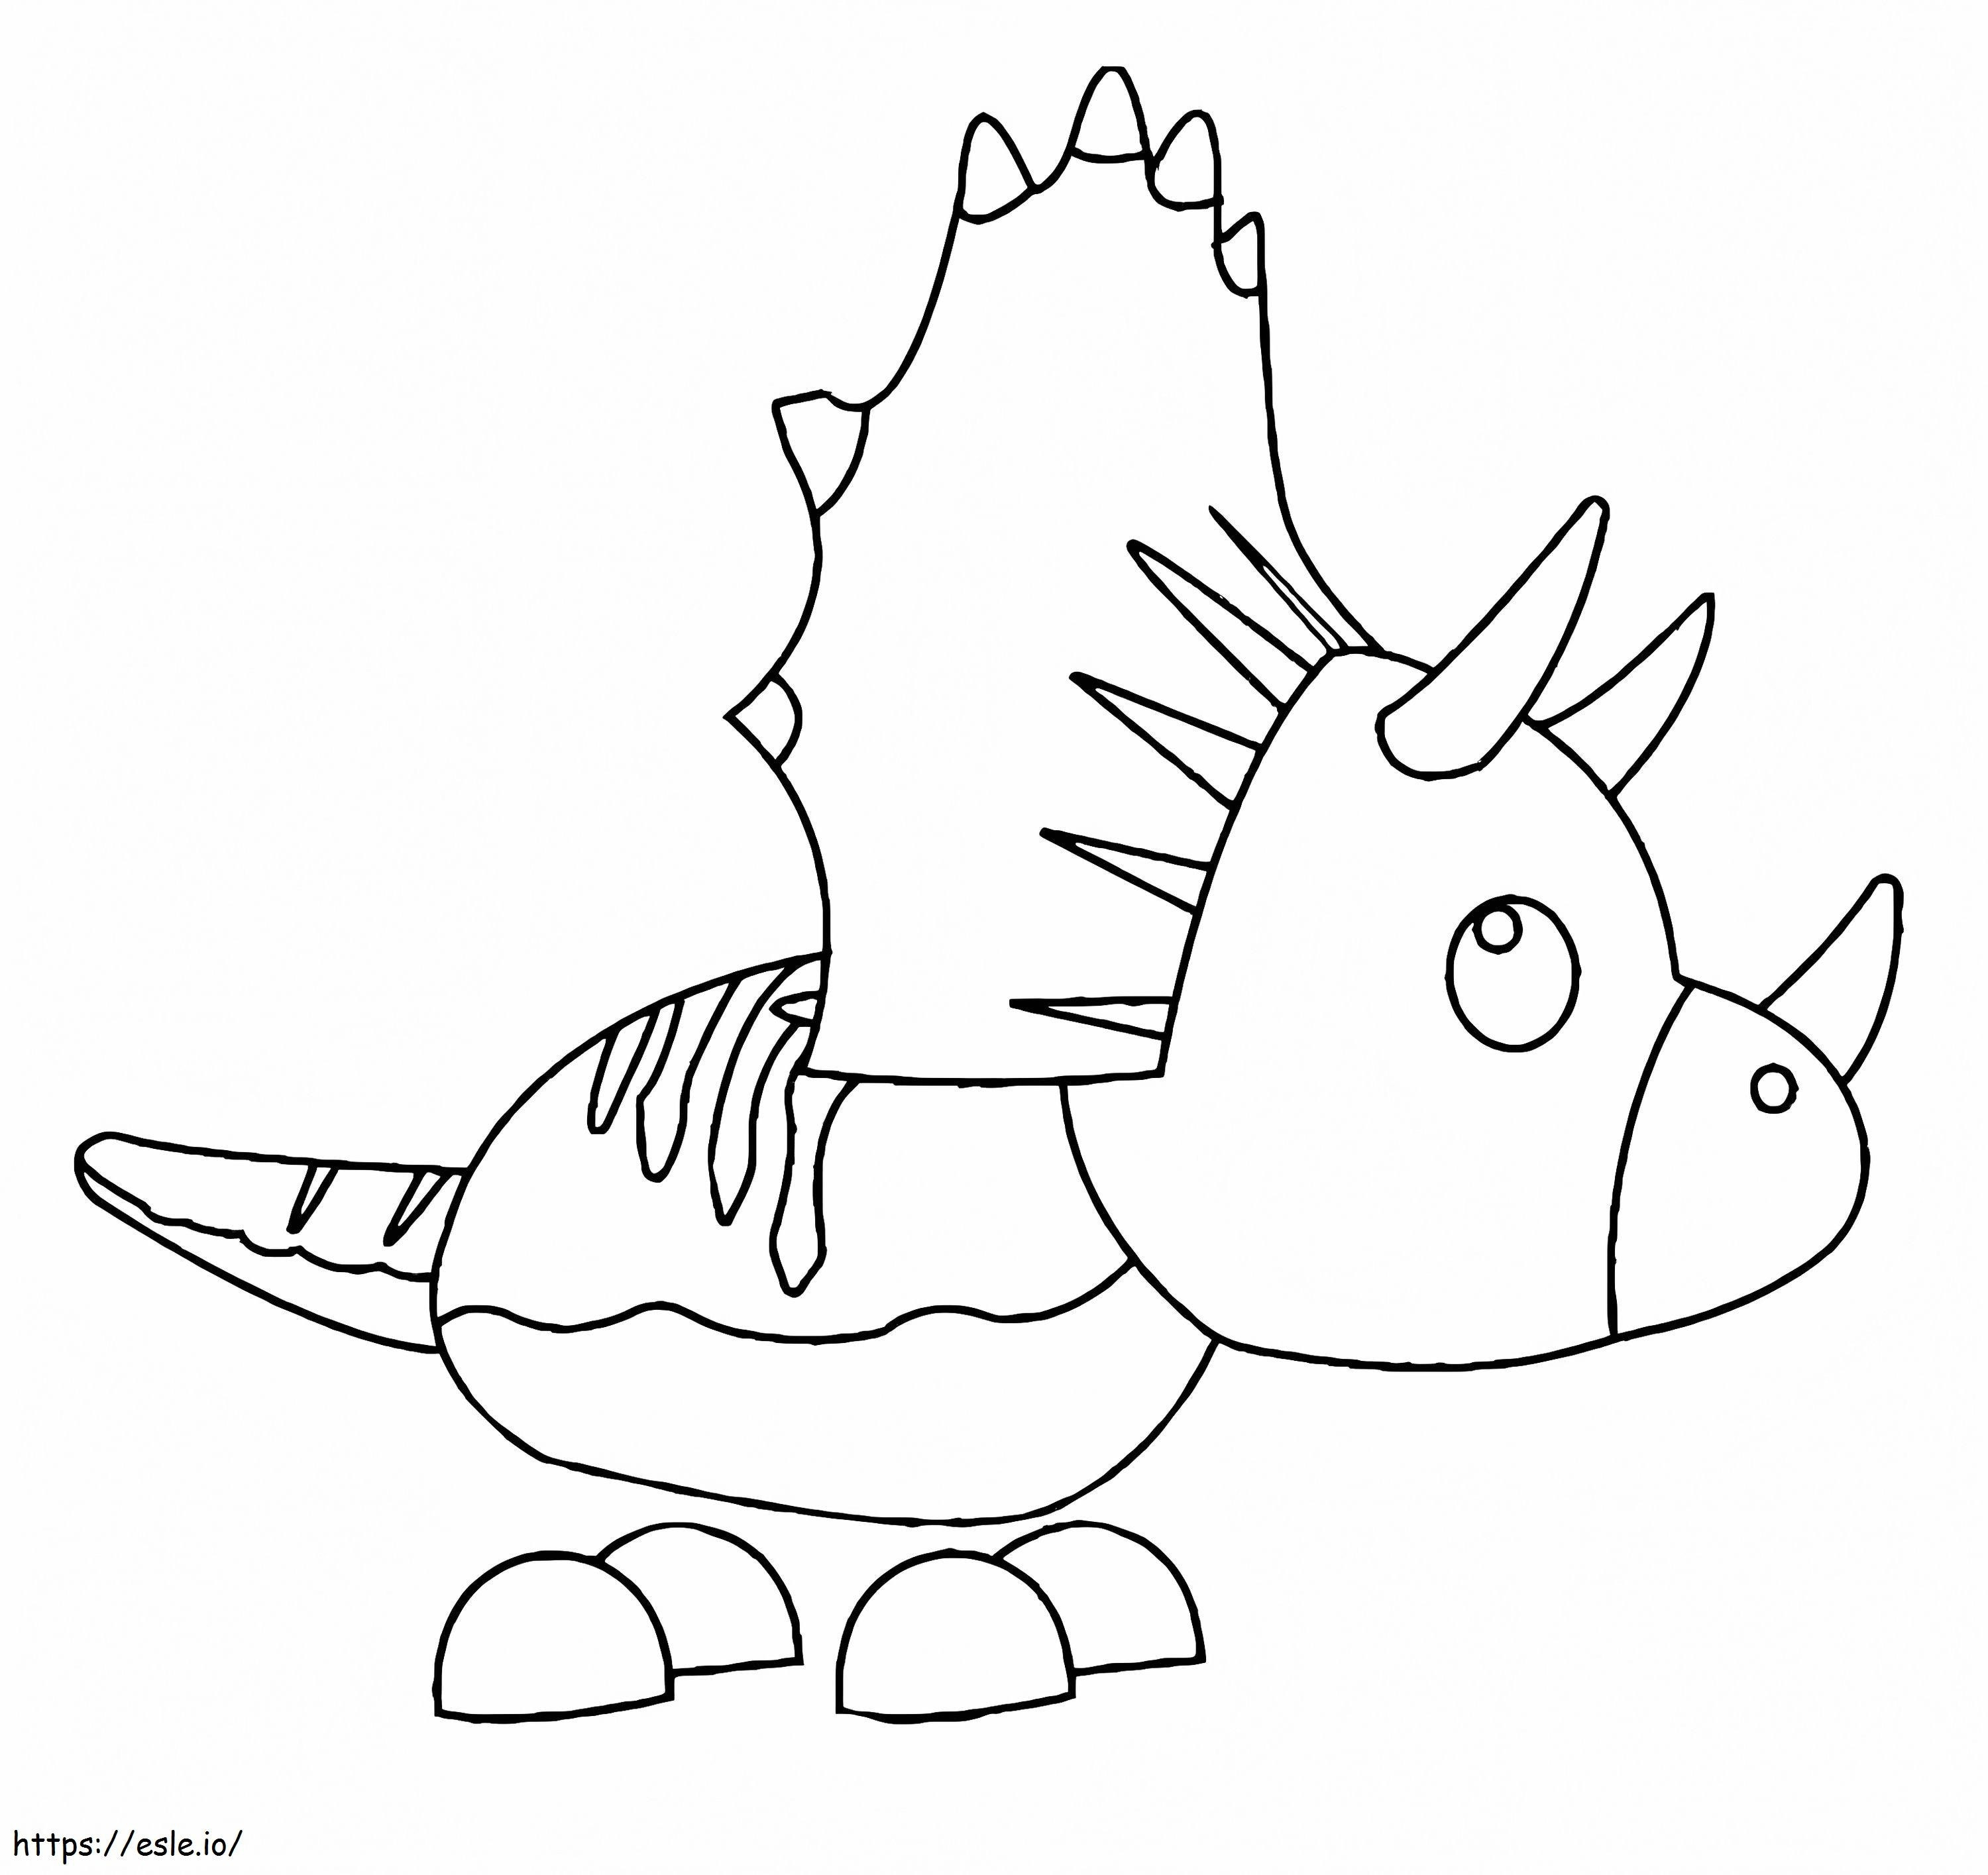 Adopt Me Pet Triceratops coloring page